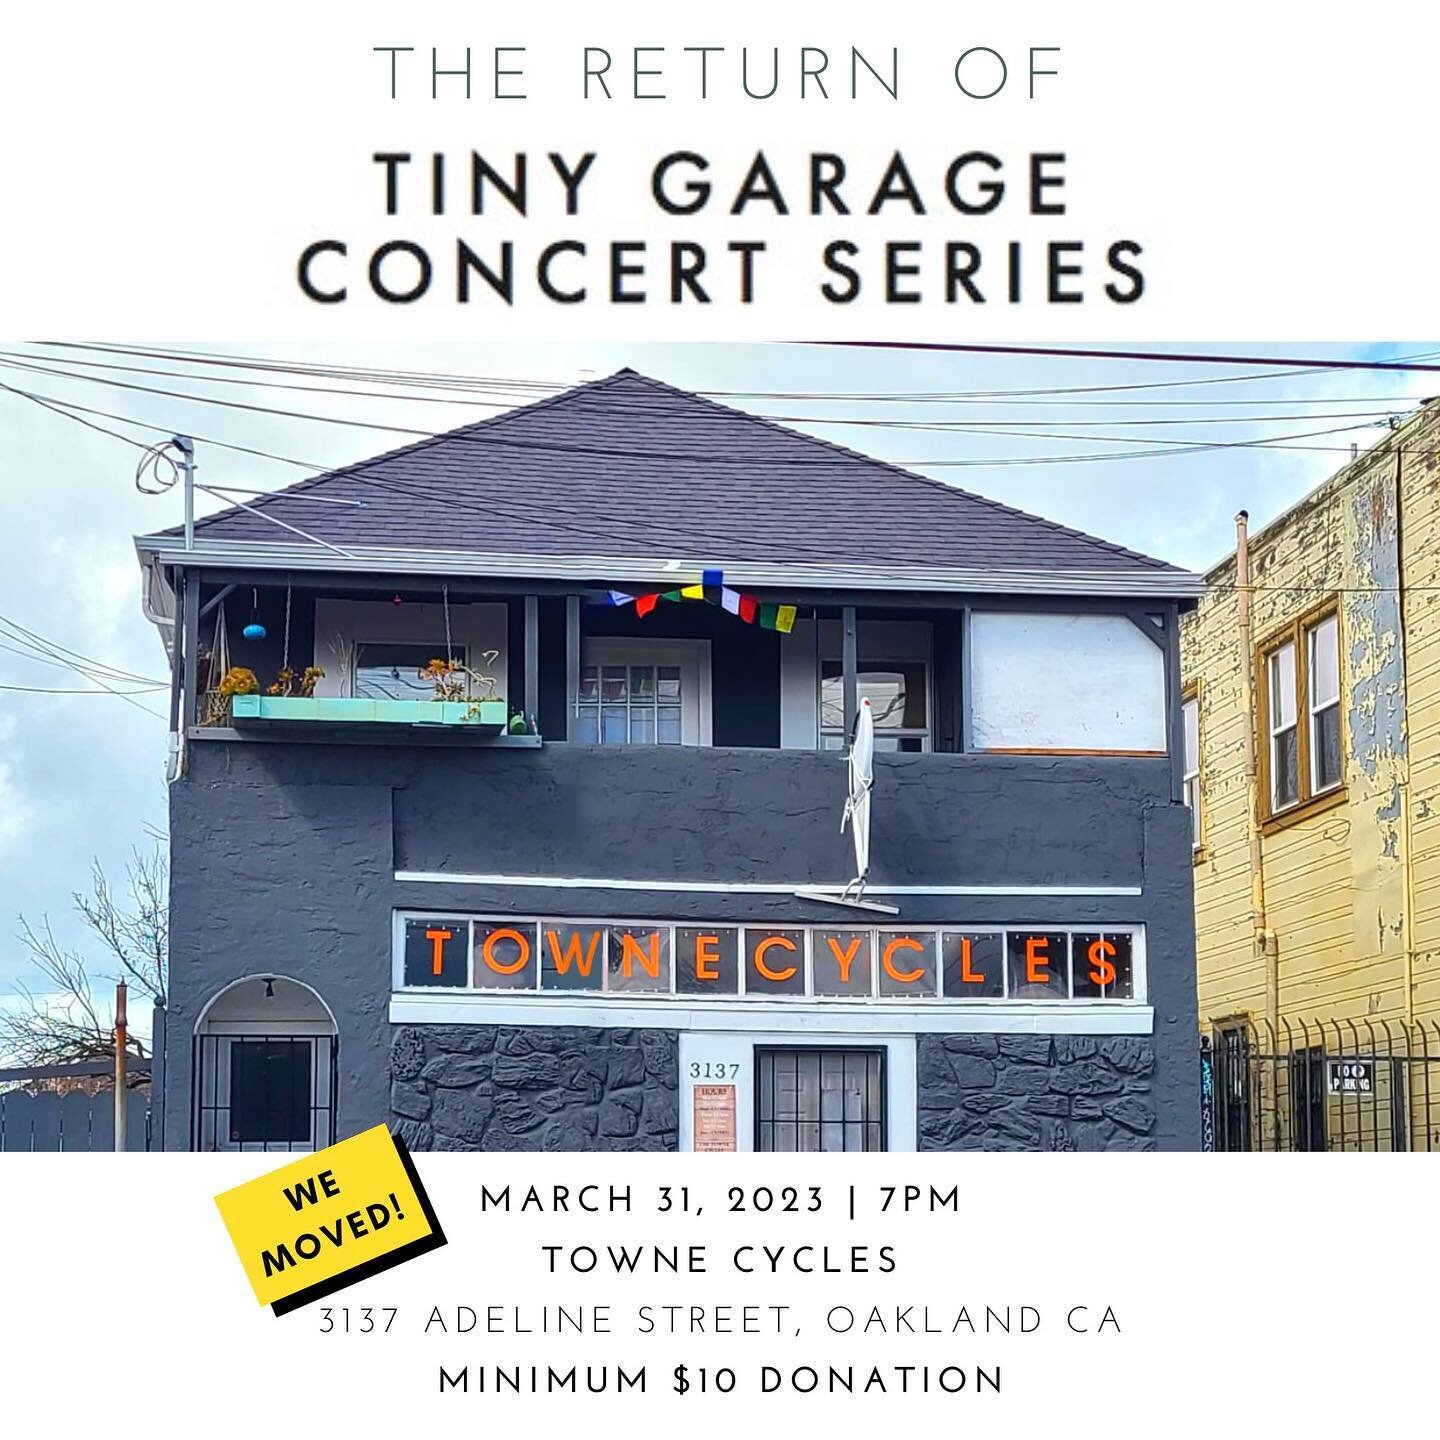 Playing a solo opener at the end of the month for @tinygarageconcerts! very excited and nervous!